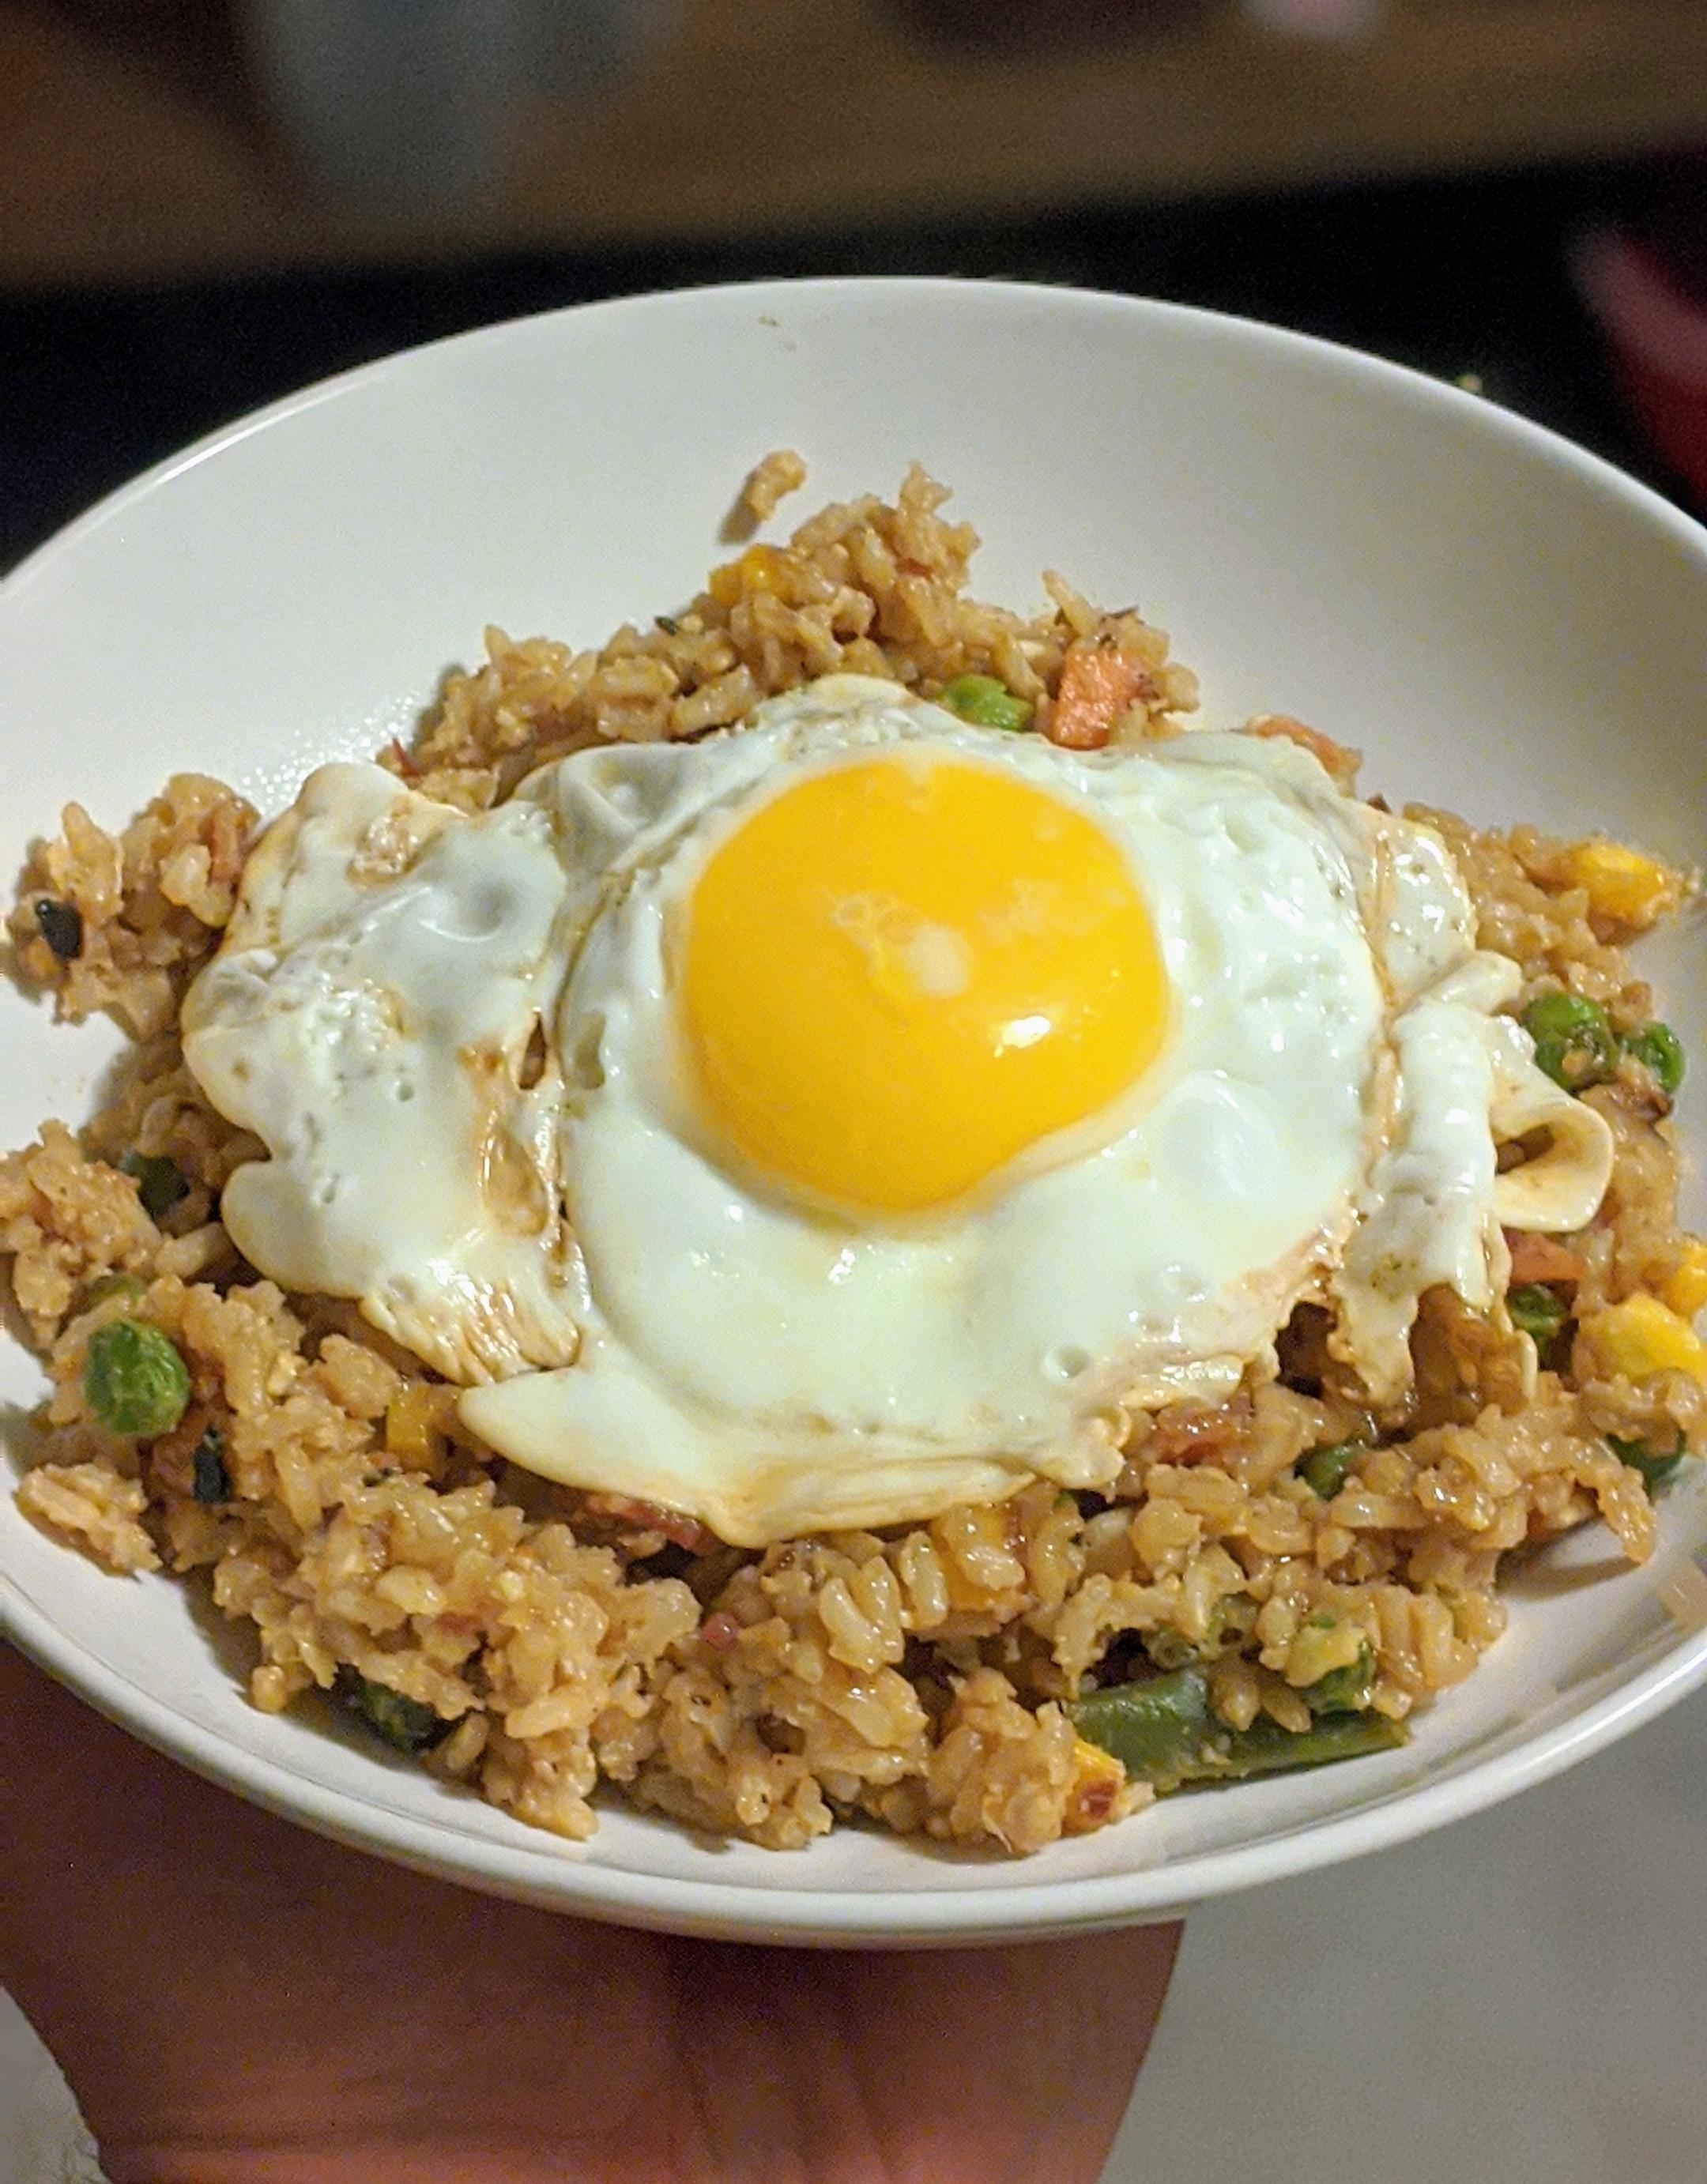 A bowl of fried rice topped with a sunny-side-up egg held in hand